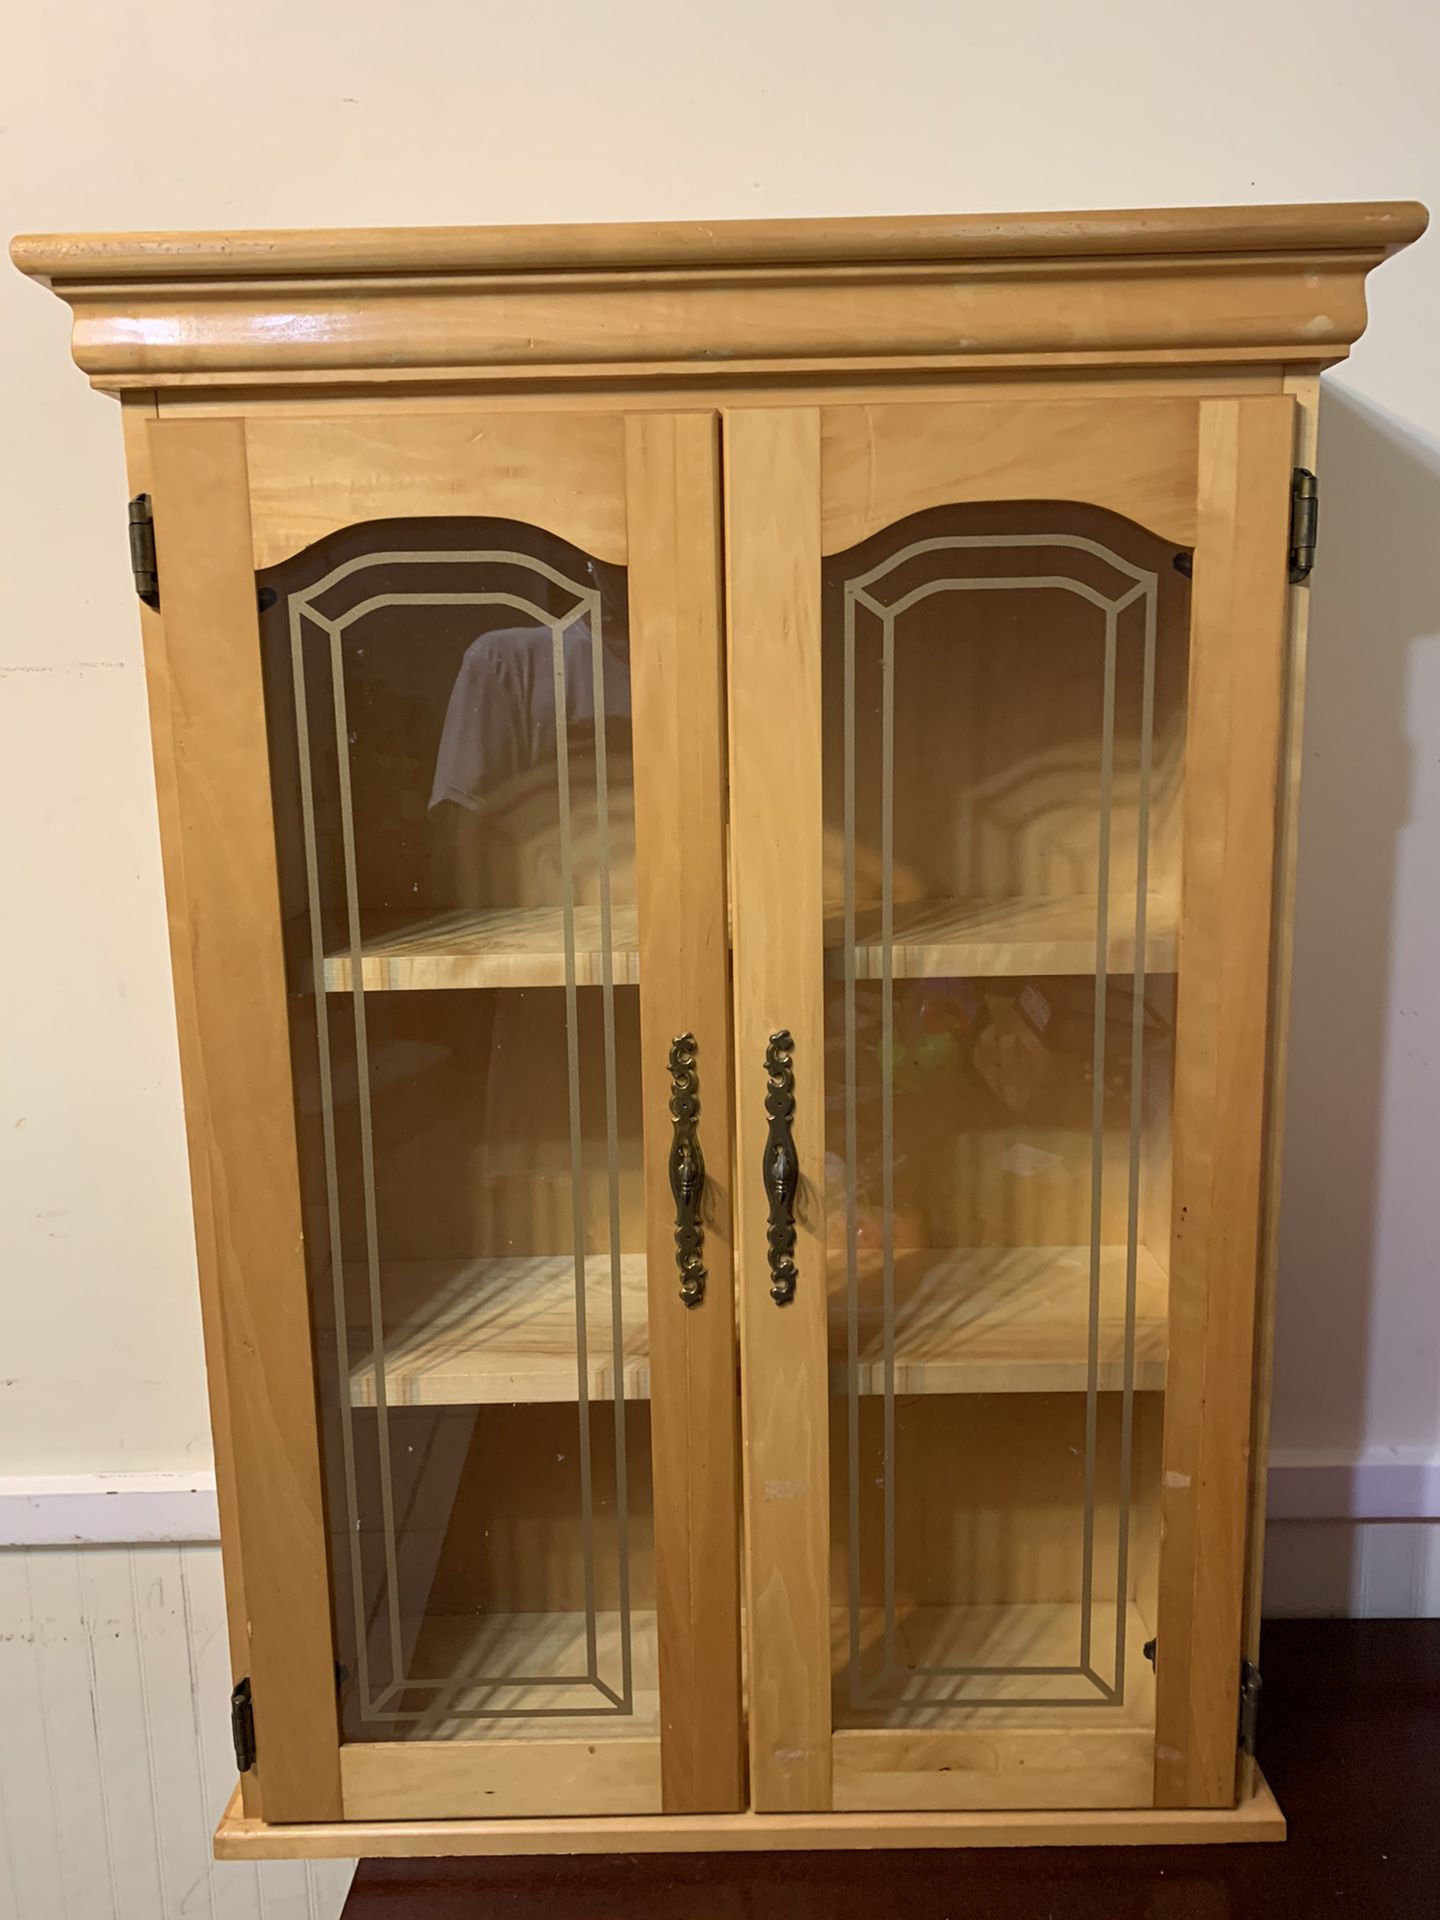 Real Wood Medicine Cabinet/ Organizer (27 x 8.3 inches) 36 inches Tall. Plz see DESCRIPTION.